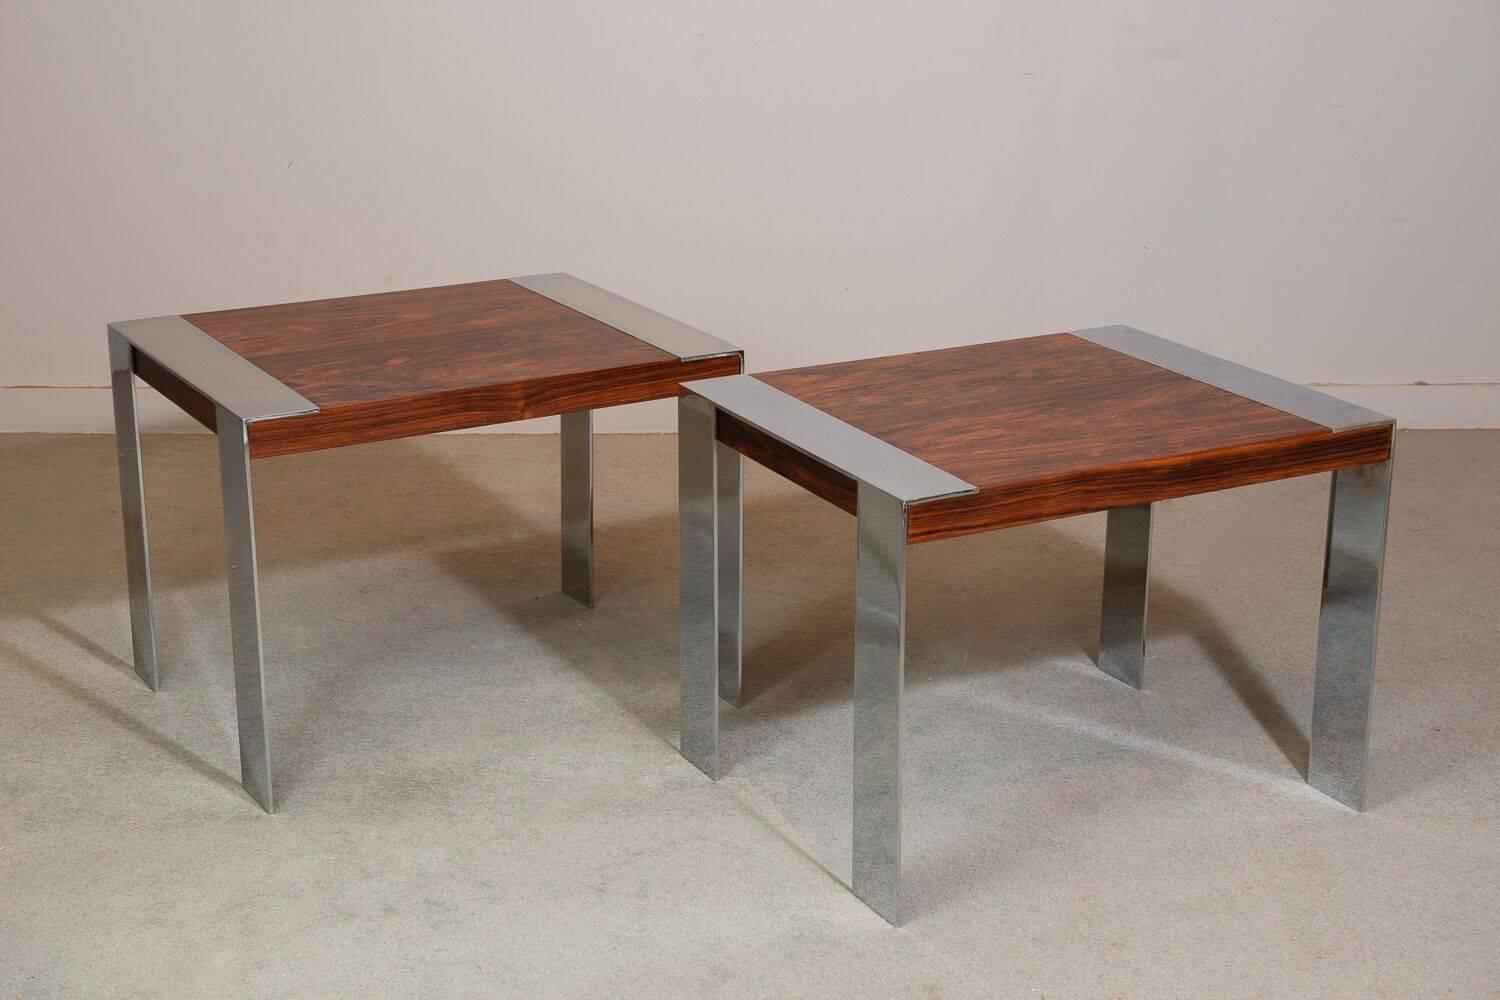 Midcentury rosewood and chrome side tables by Milo Baughman.